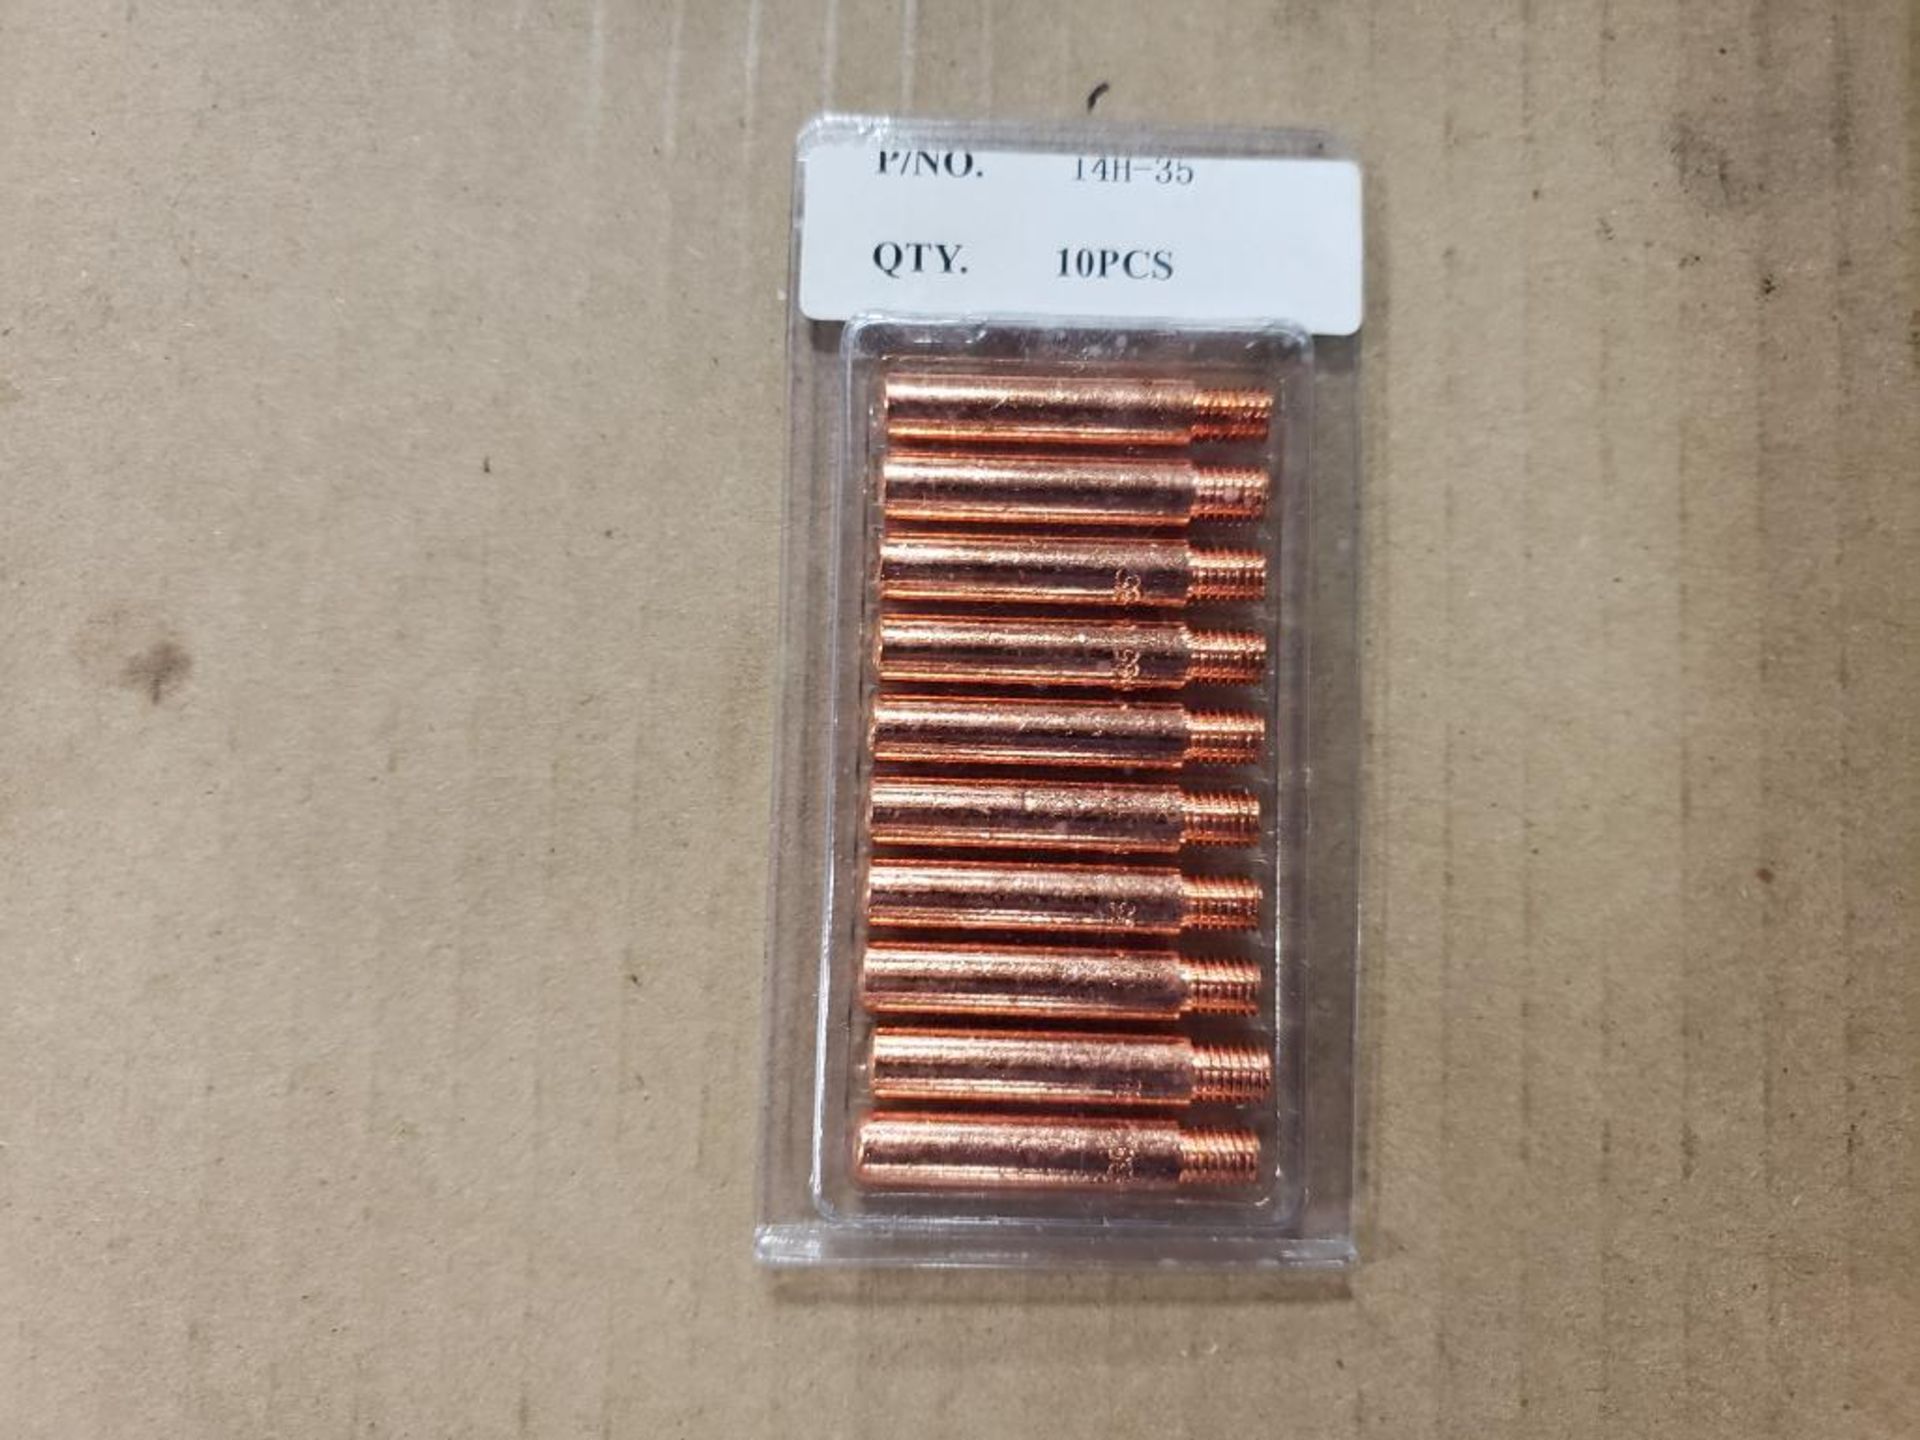 Qty 1200 - Red Onyx welding tips. Part number 14H-35. 12 boxes of 100 in 10 packs. - Image 3 of 3